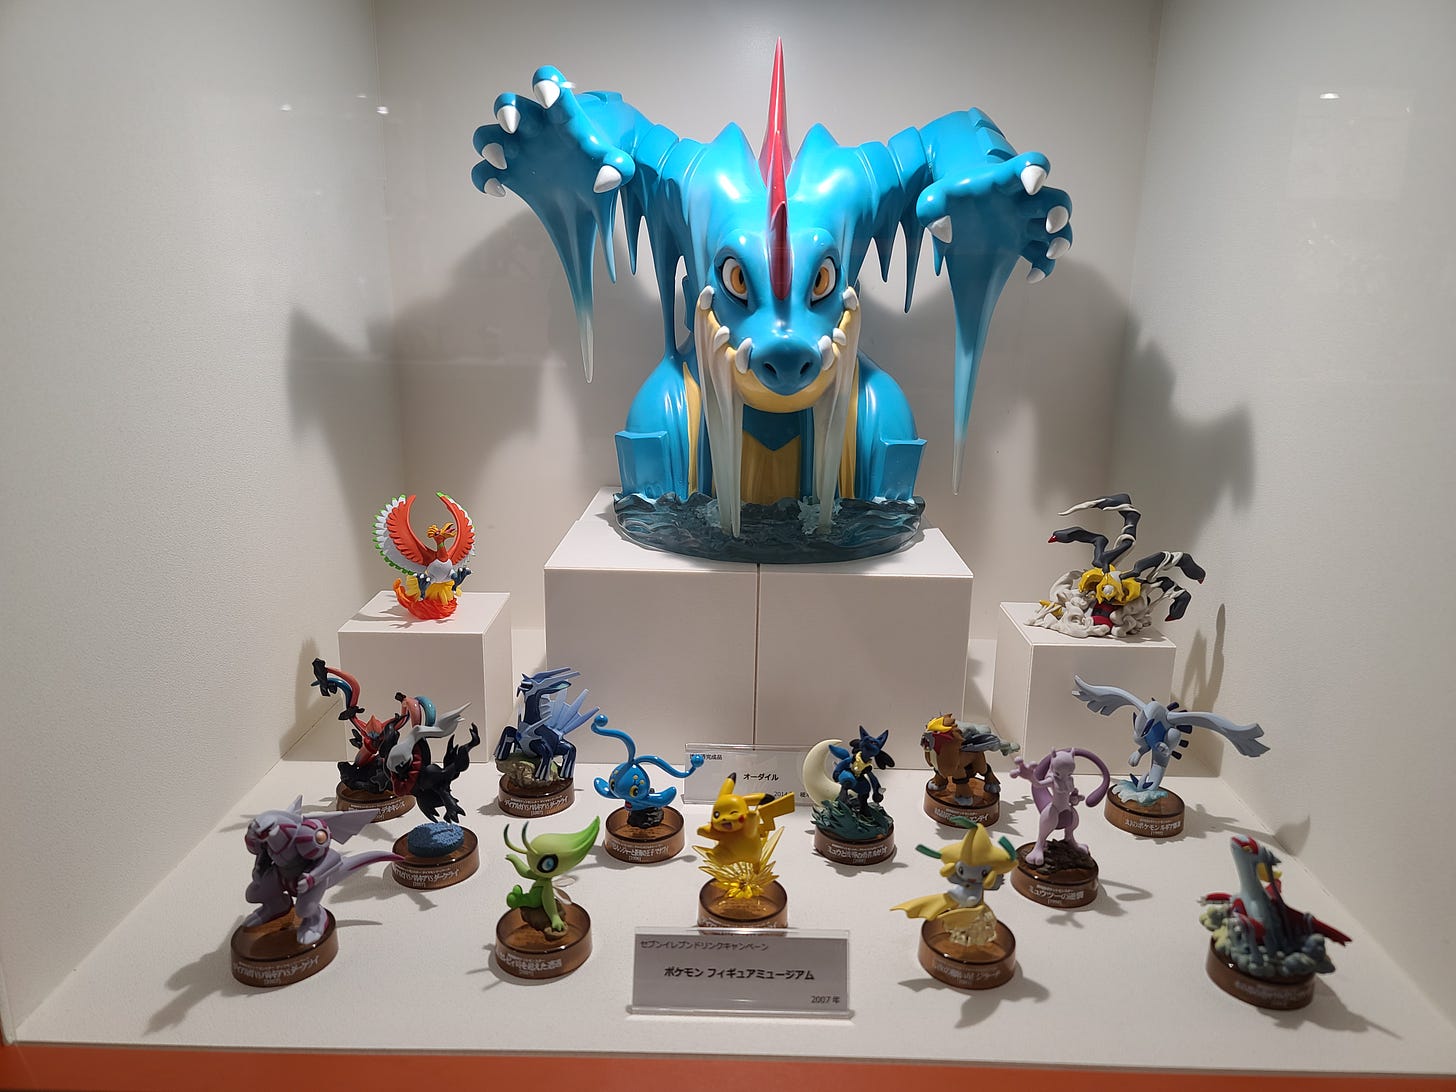 A huge Feraligatr statue liquifying itself can be found in the Kaiyodo Figure Museum, surrounded by many other legendary and mythical Pokémon figures